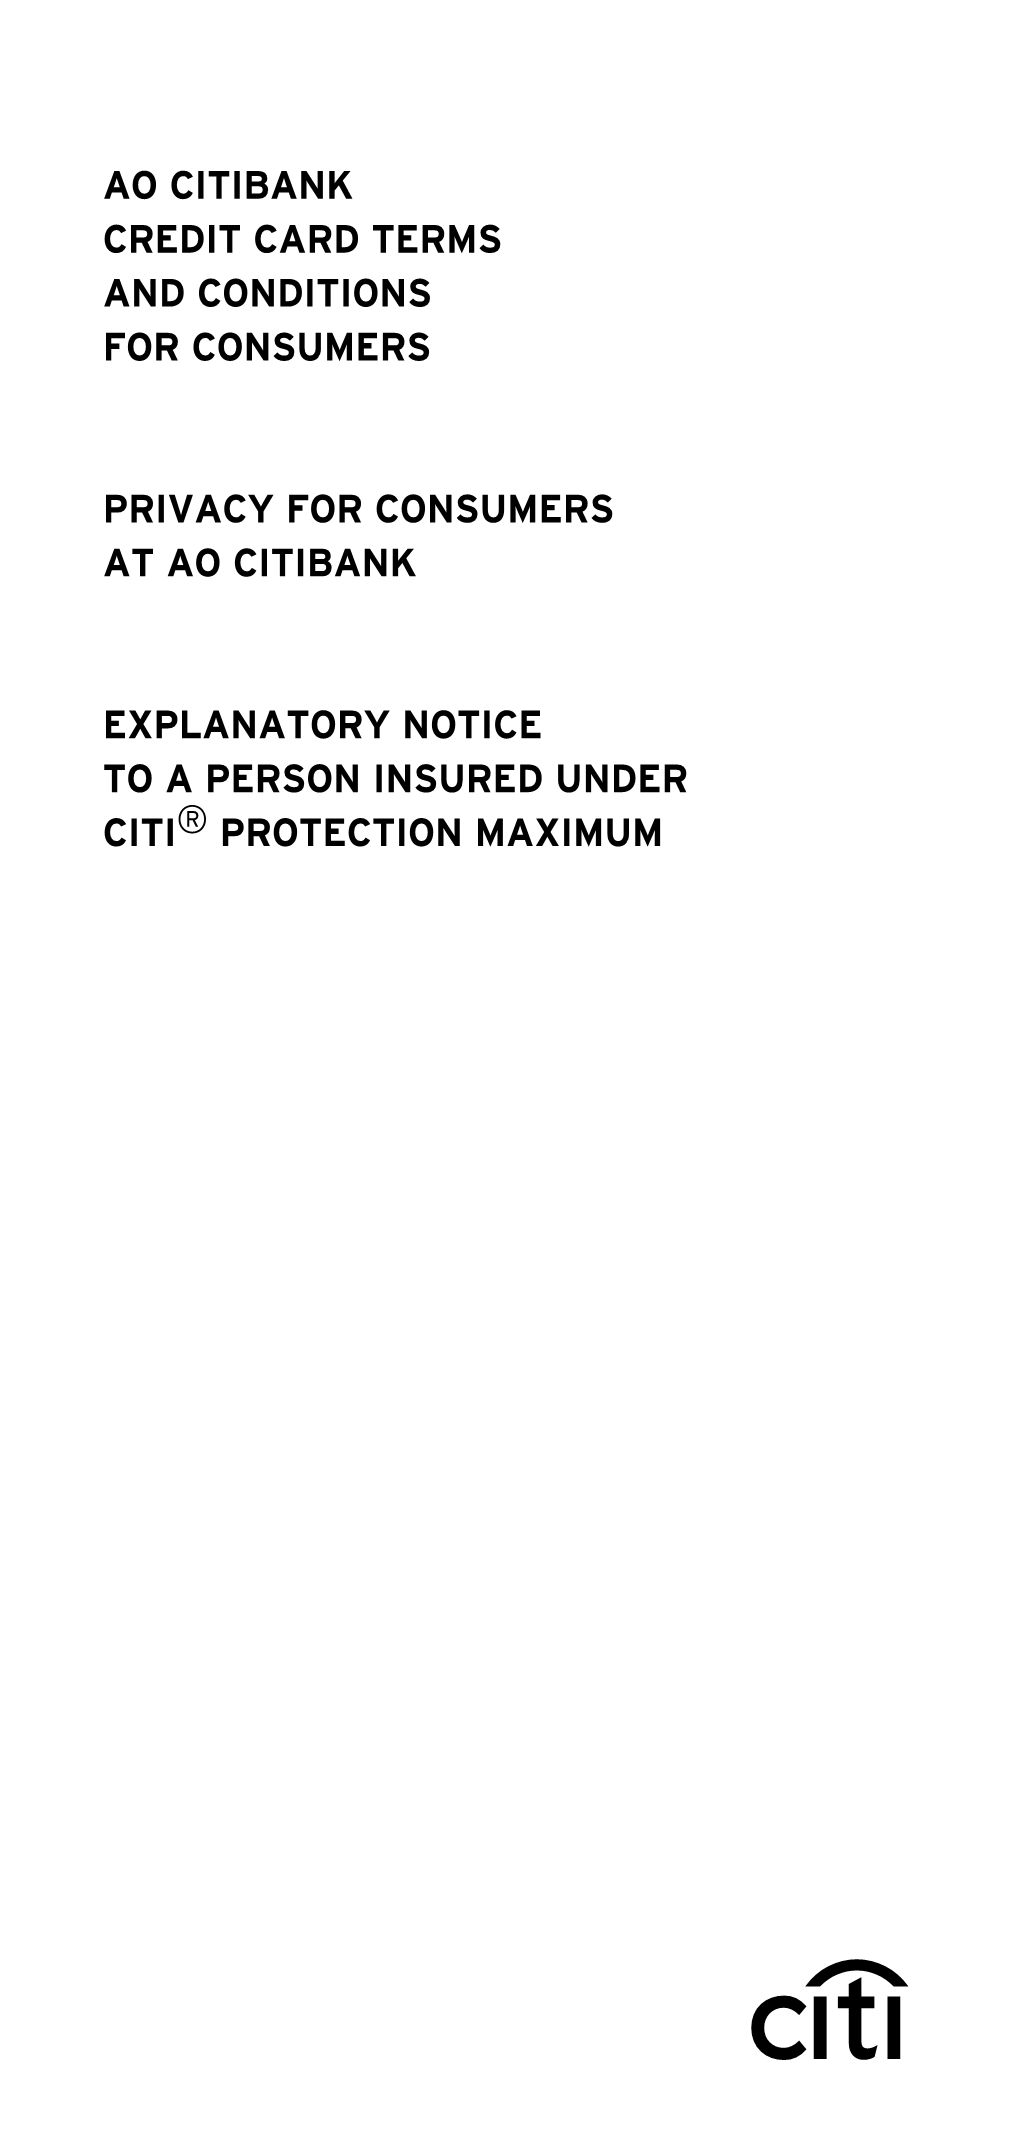 Ao Citibank Credit Card Terms and Conditions for Consumers